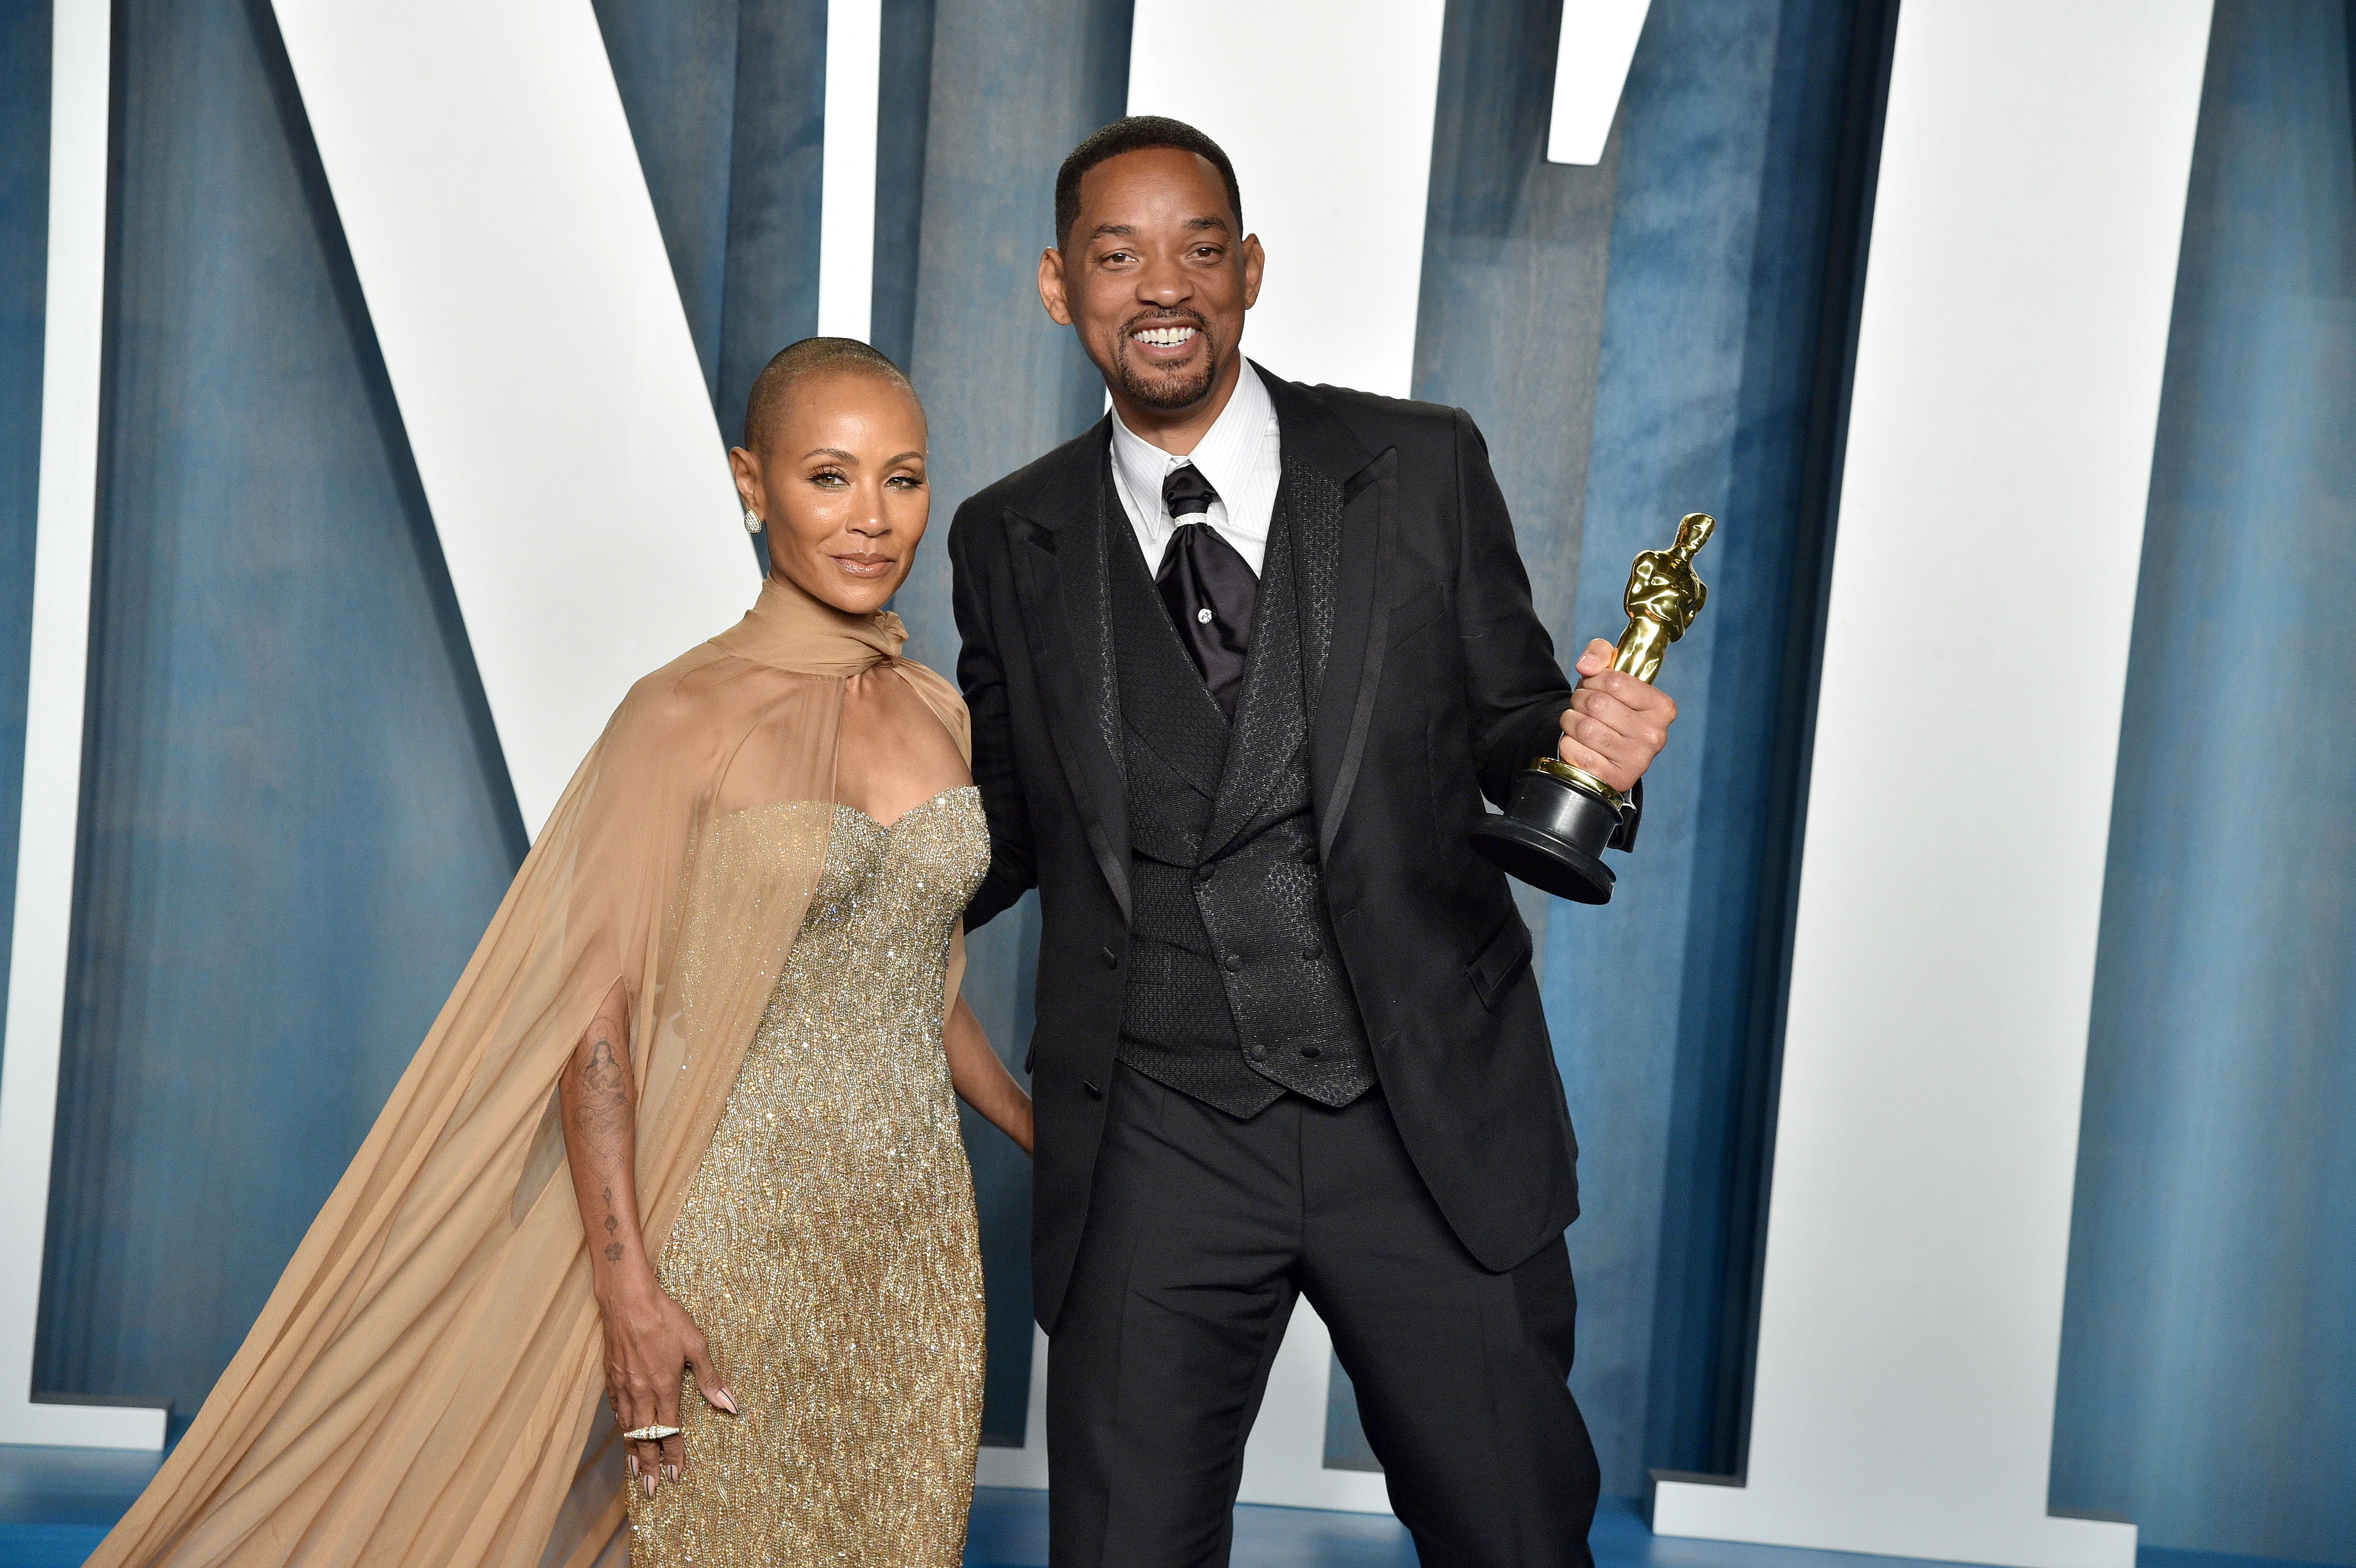 Jada Pinkett Smith and Will Smith at the 2022 Vanity Fair Oscar Party in Beverly Hills, California on March 27, 2022. | Source: Getty Images